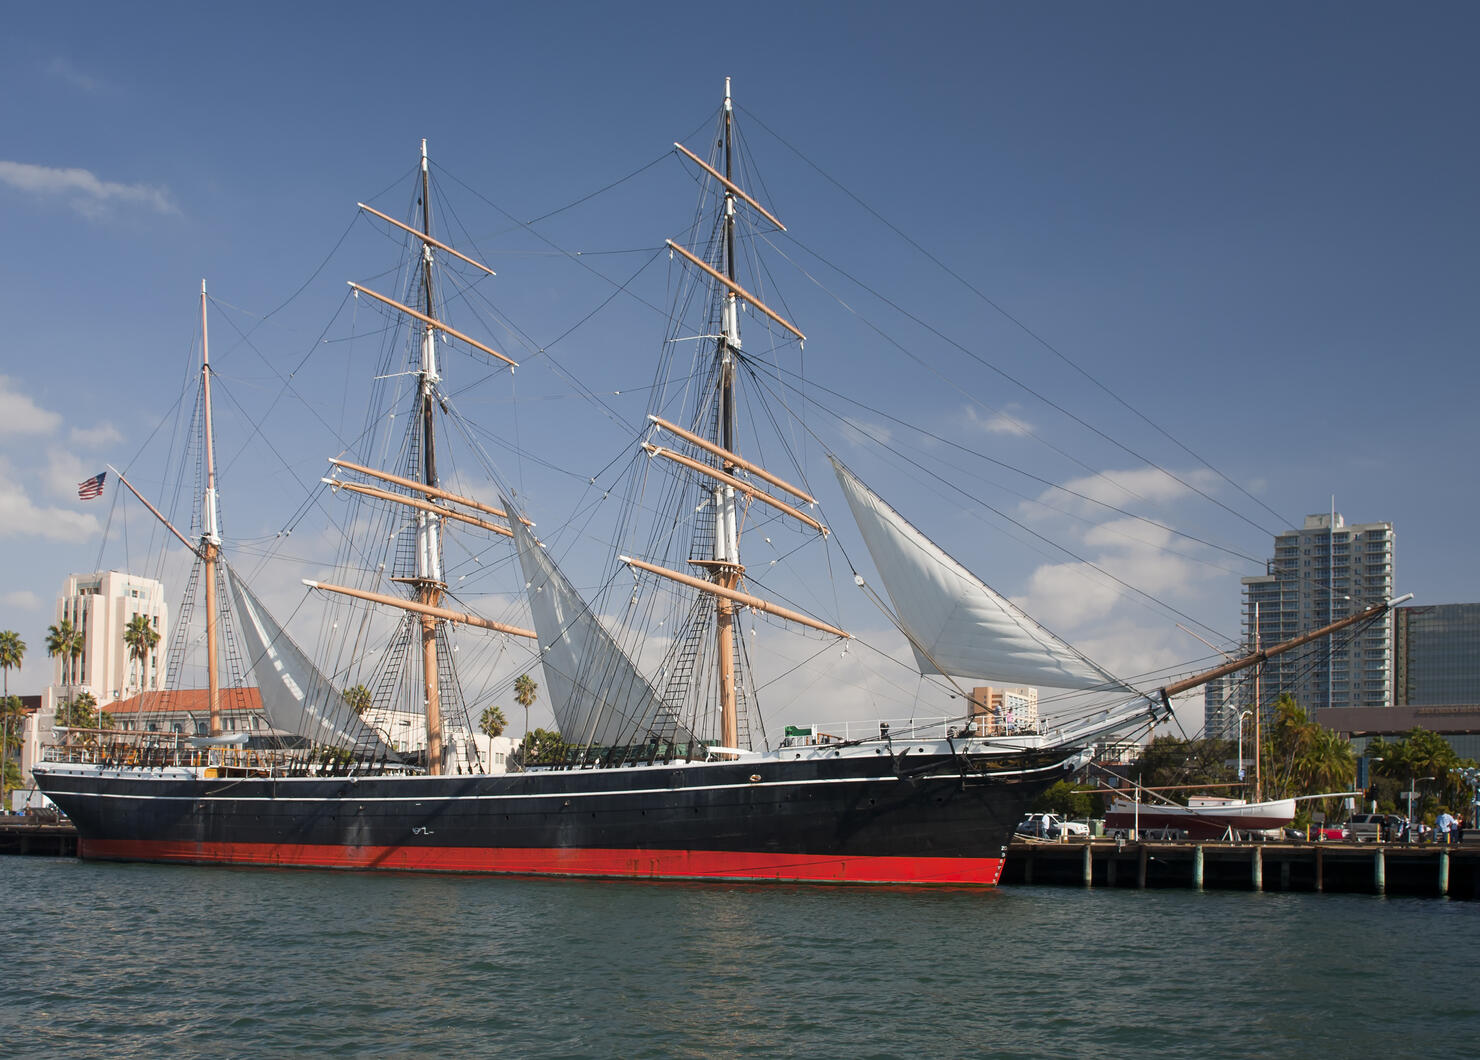 The Star of India is the world's oldest active sailing ship.